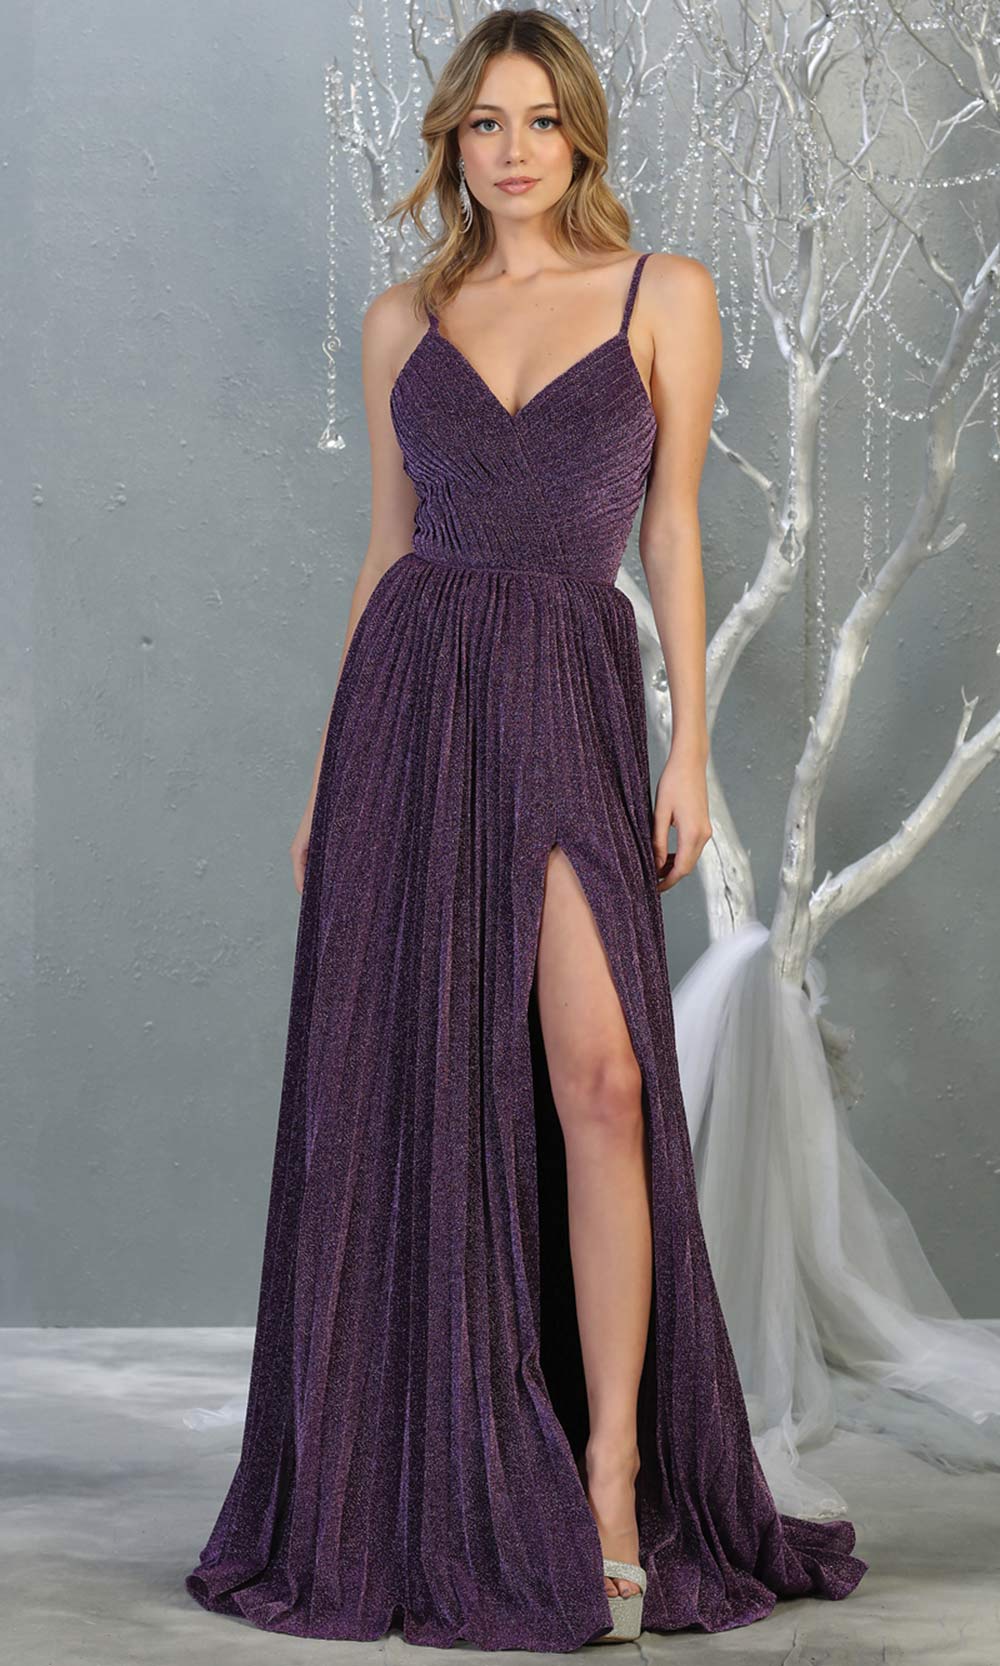 Mayqueen MQ1795 long eggplant v neck evening flowy dress w/ high slit. Full length gown w/ crinkle dress is perfect for  enagagement/e-shoot dress, formal wedding guest, indowestern gown, evening party dress, prom, bridesmaid. Plus sizes avail.jpg